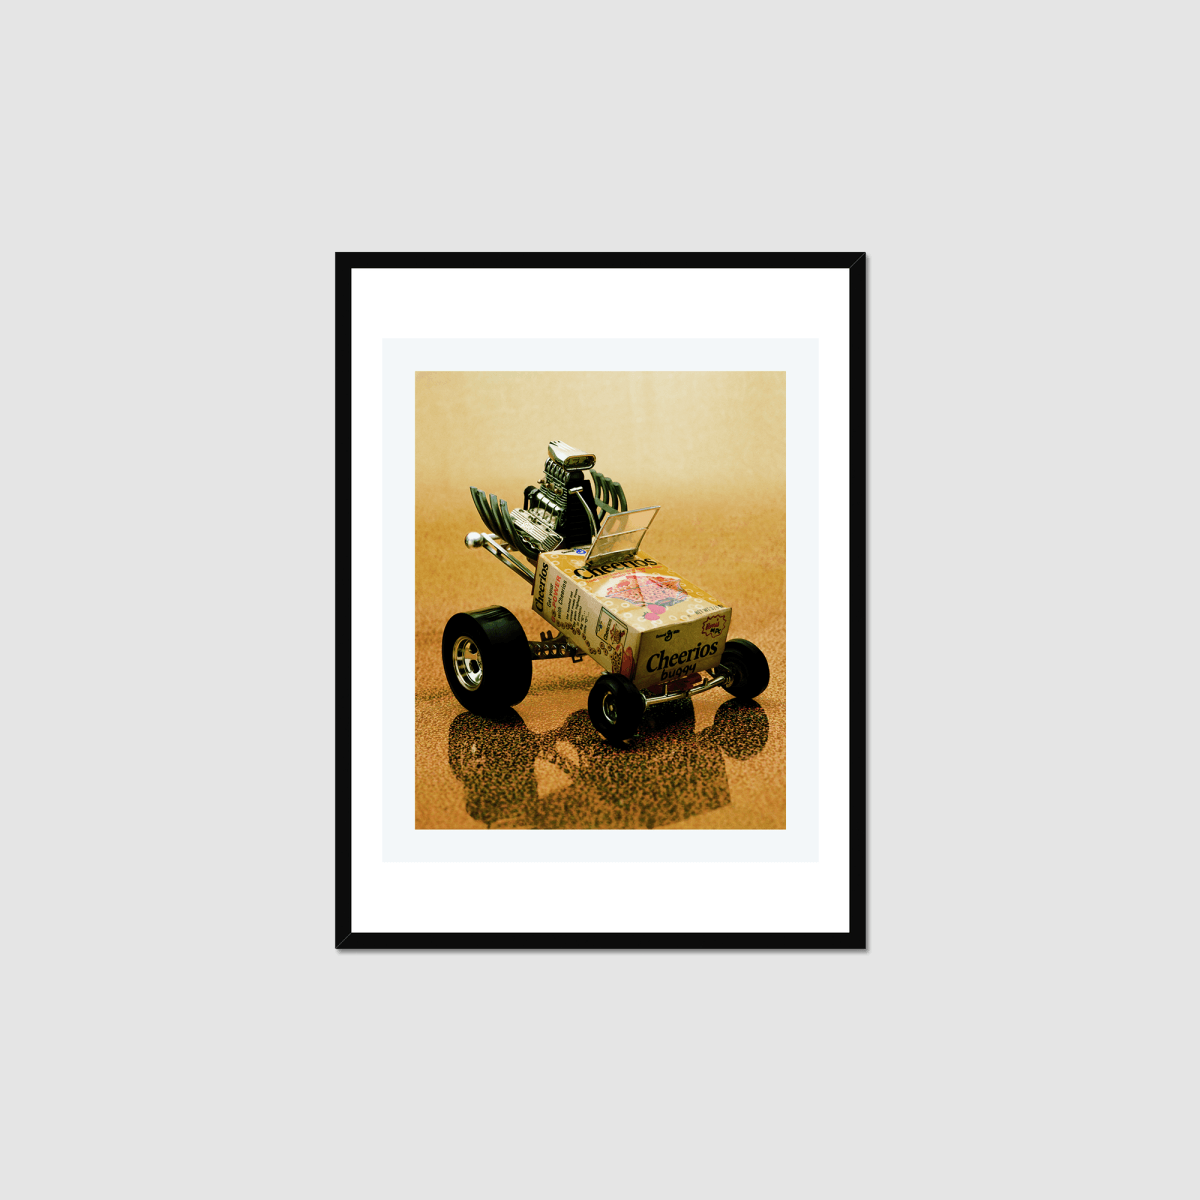 Prototype Cheerios Hot Rod by George Barris Framed Print